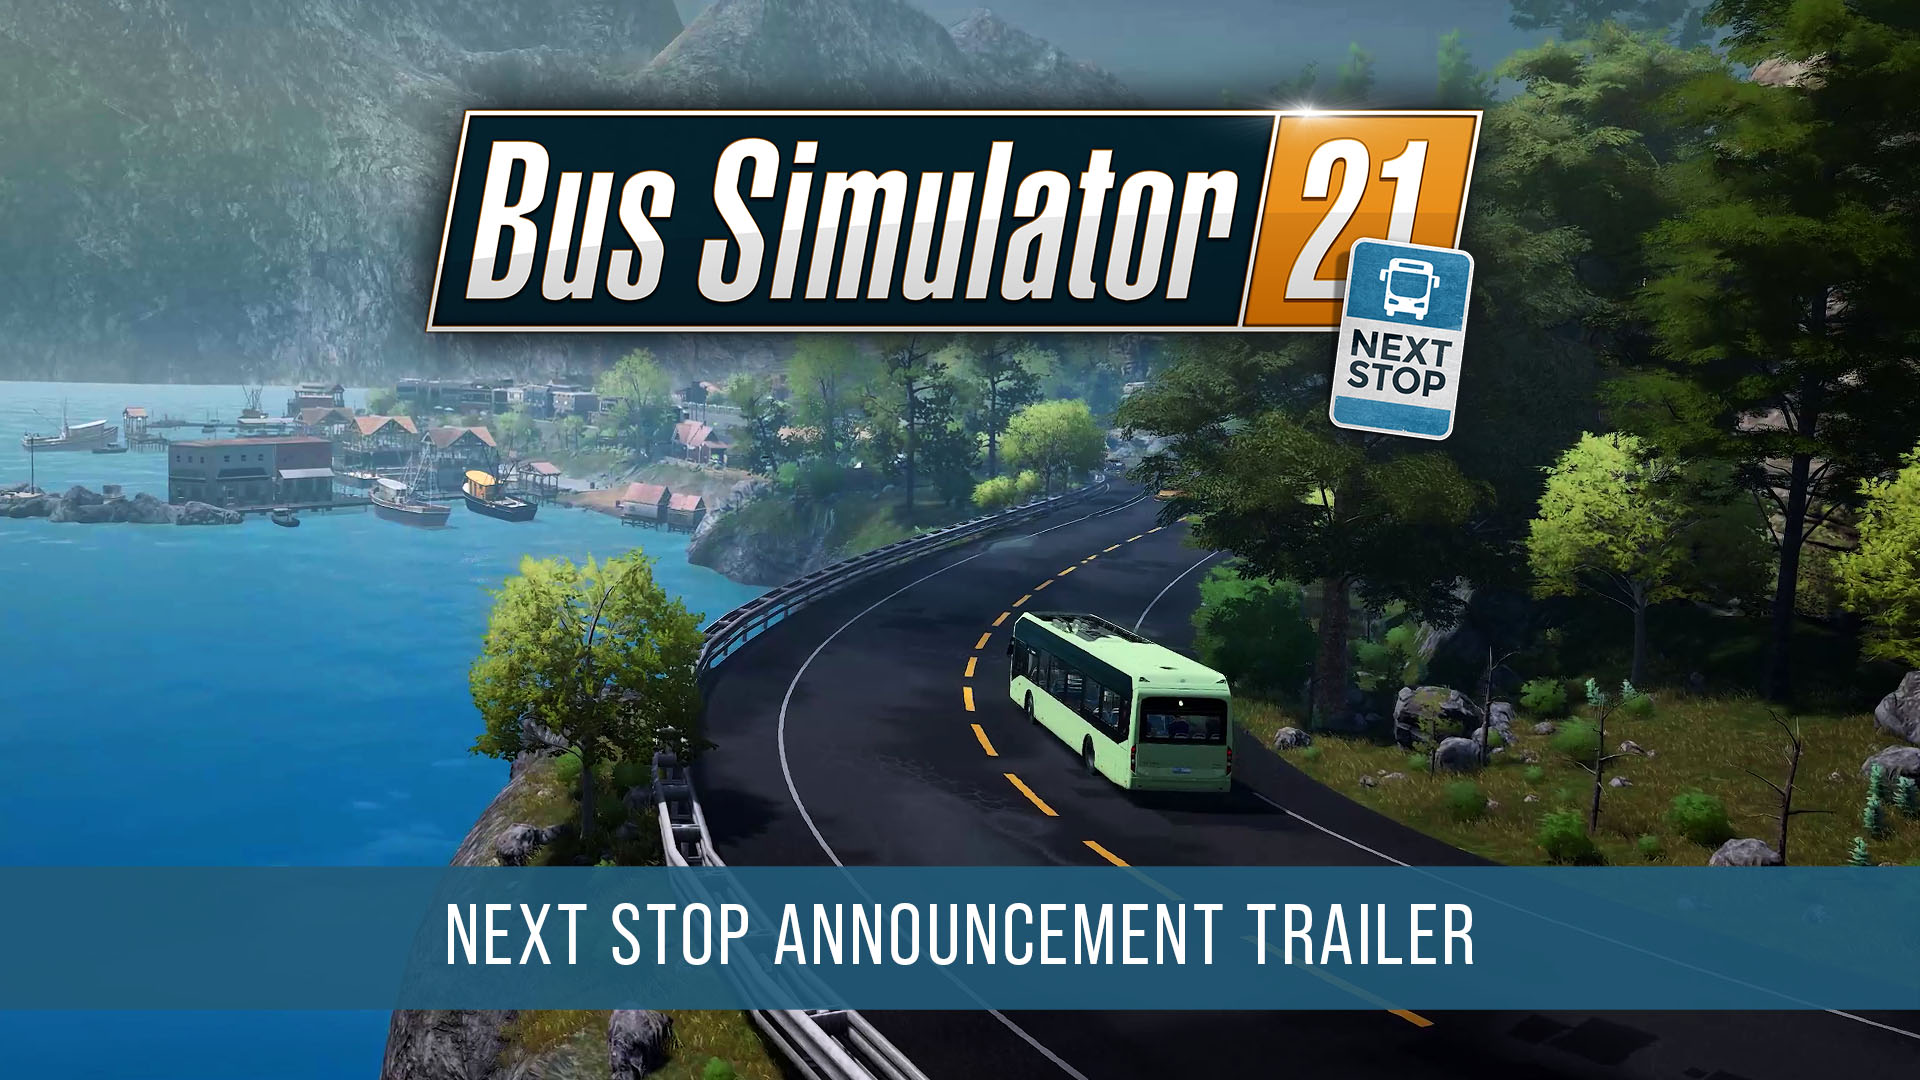 Expansion, and Gen, Gold Next Next Update, Simulator Mode, Map 21 Bus Stop: Edition, Career Big